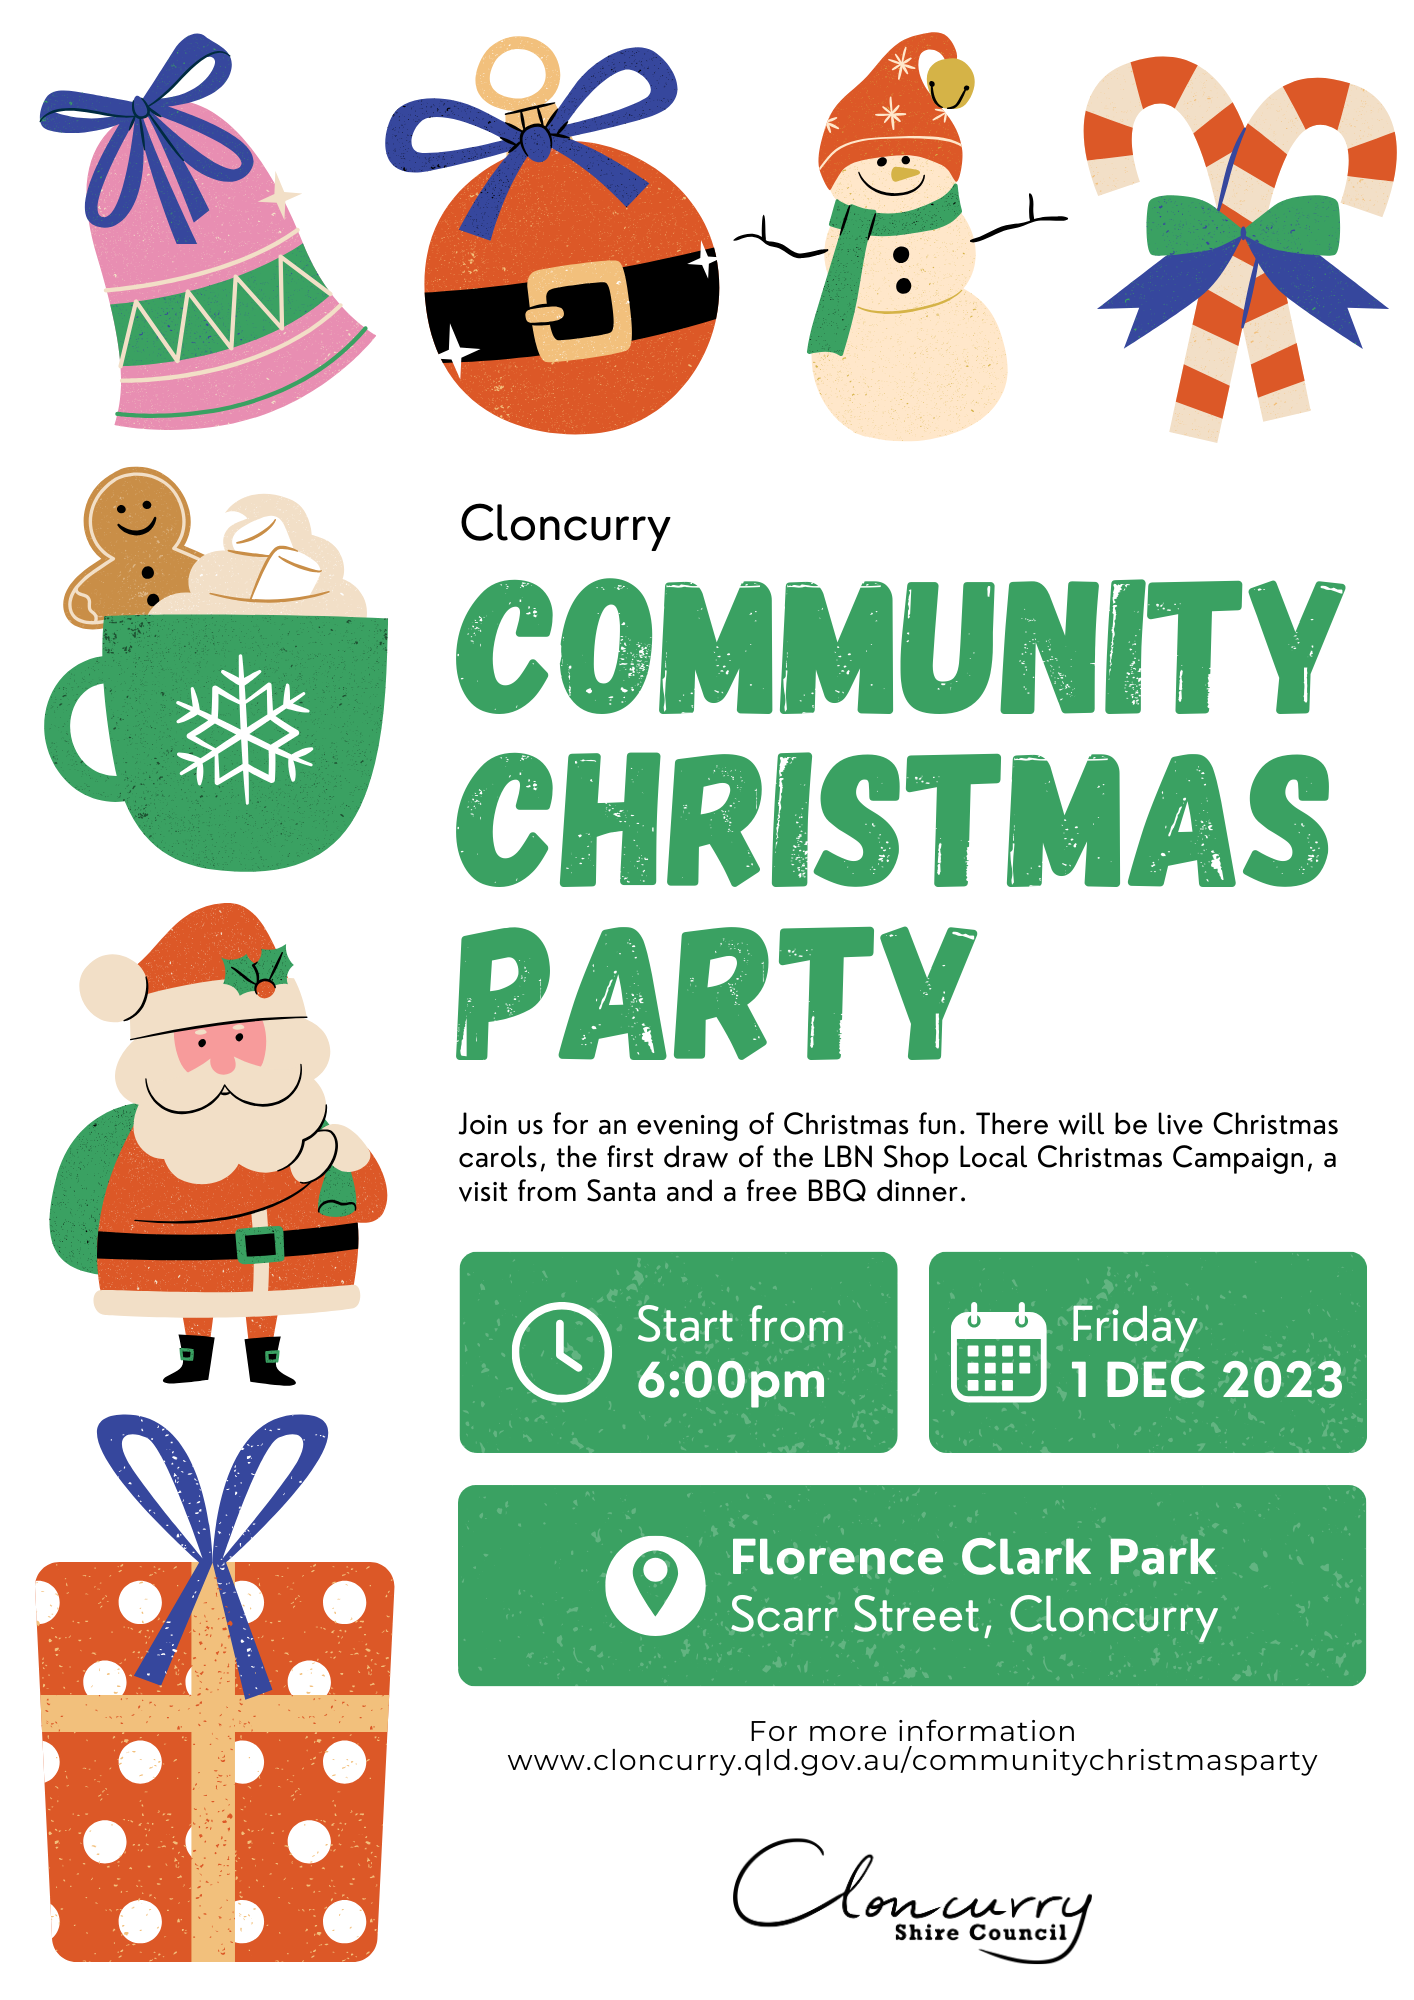 Cloncurry Community Christmas Party 2023 - Event poster